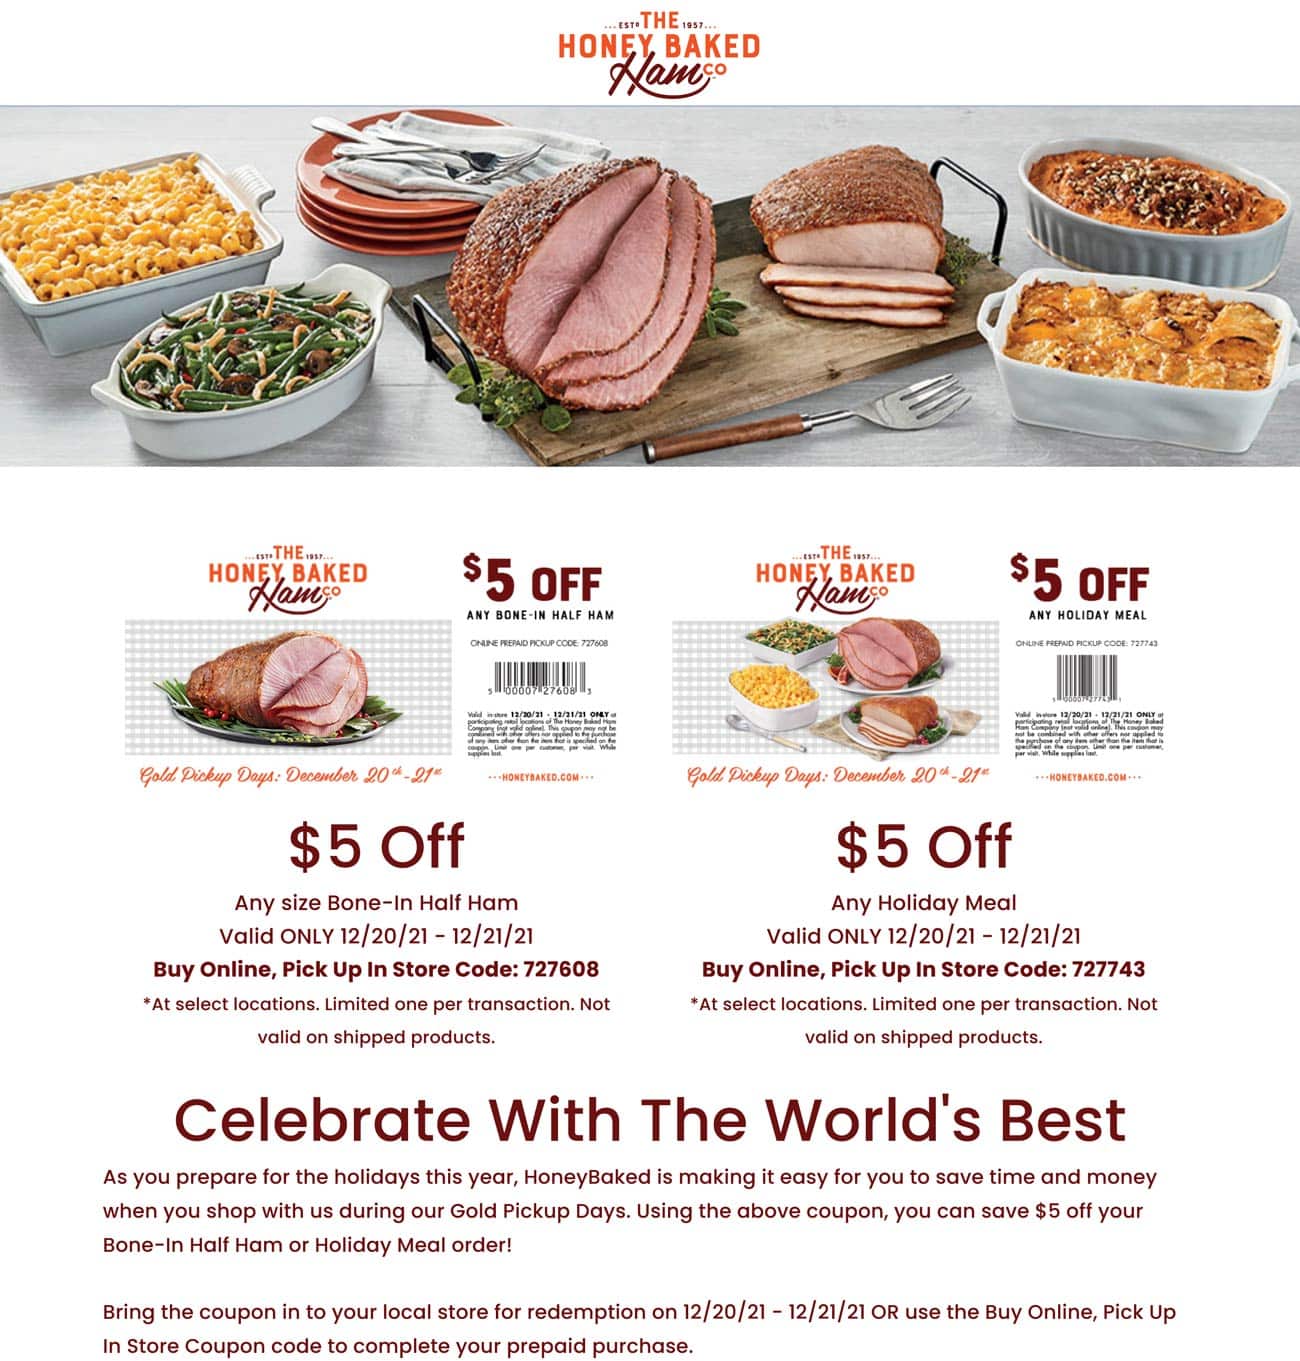 The Honey Baked Ham Company March 2022 Coupons and Promo Codes